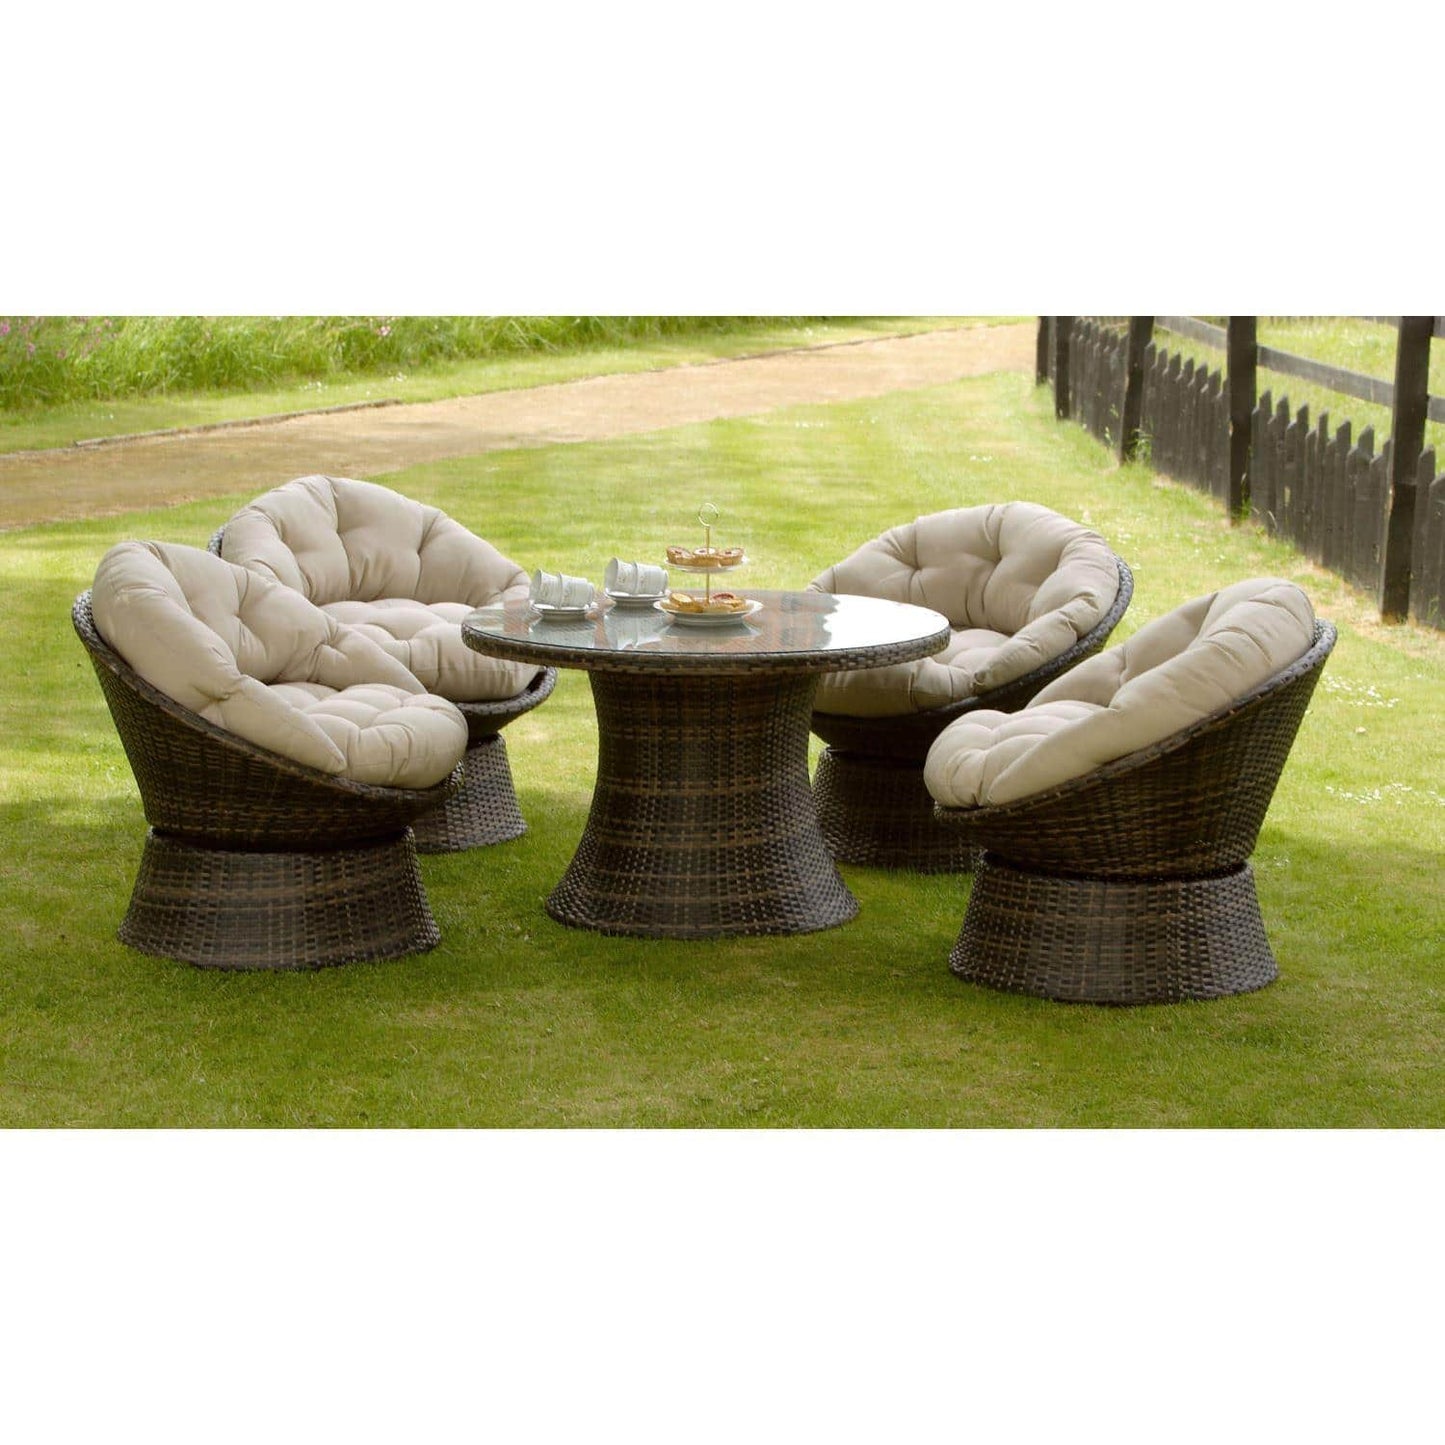 NEW SUMMER GARDEN LAWN PATIO FURNITURE SEATING 5 PIECE COMFY SWIVEL CHAIR DINING SET